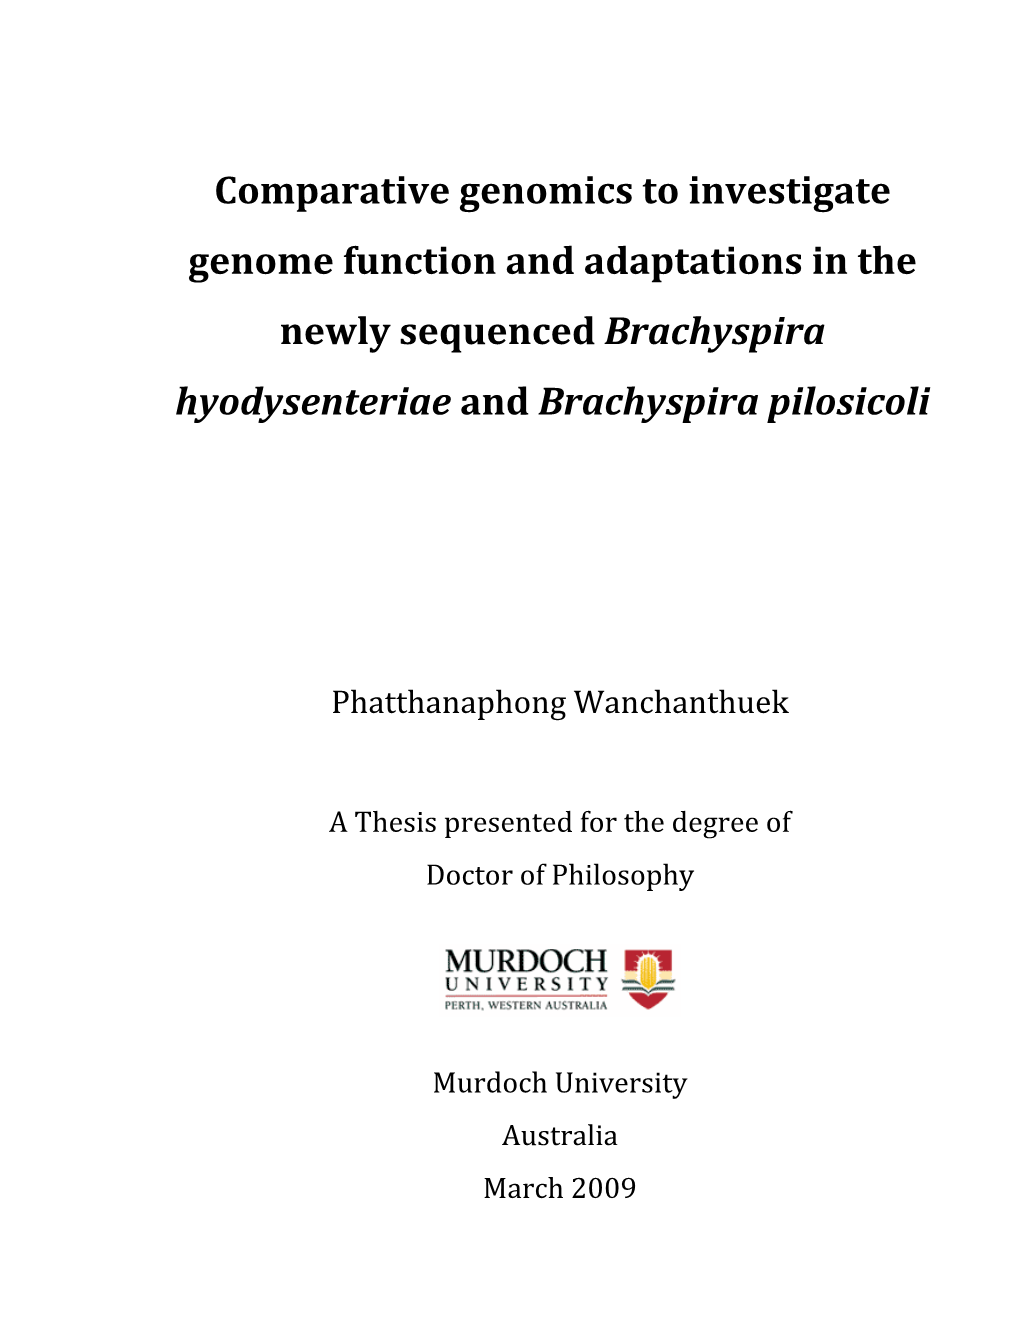 Comparative Genomics to Investigate Genome Function and Adaptations in the Newly Sequenced Brachyspira Hyodysenteriae and Brachyspira Pilosicoli